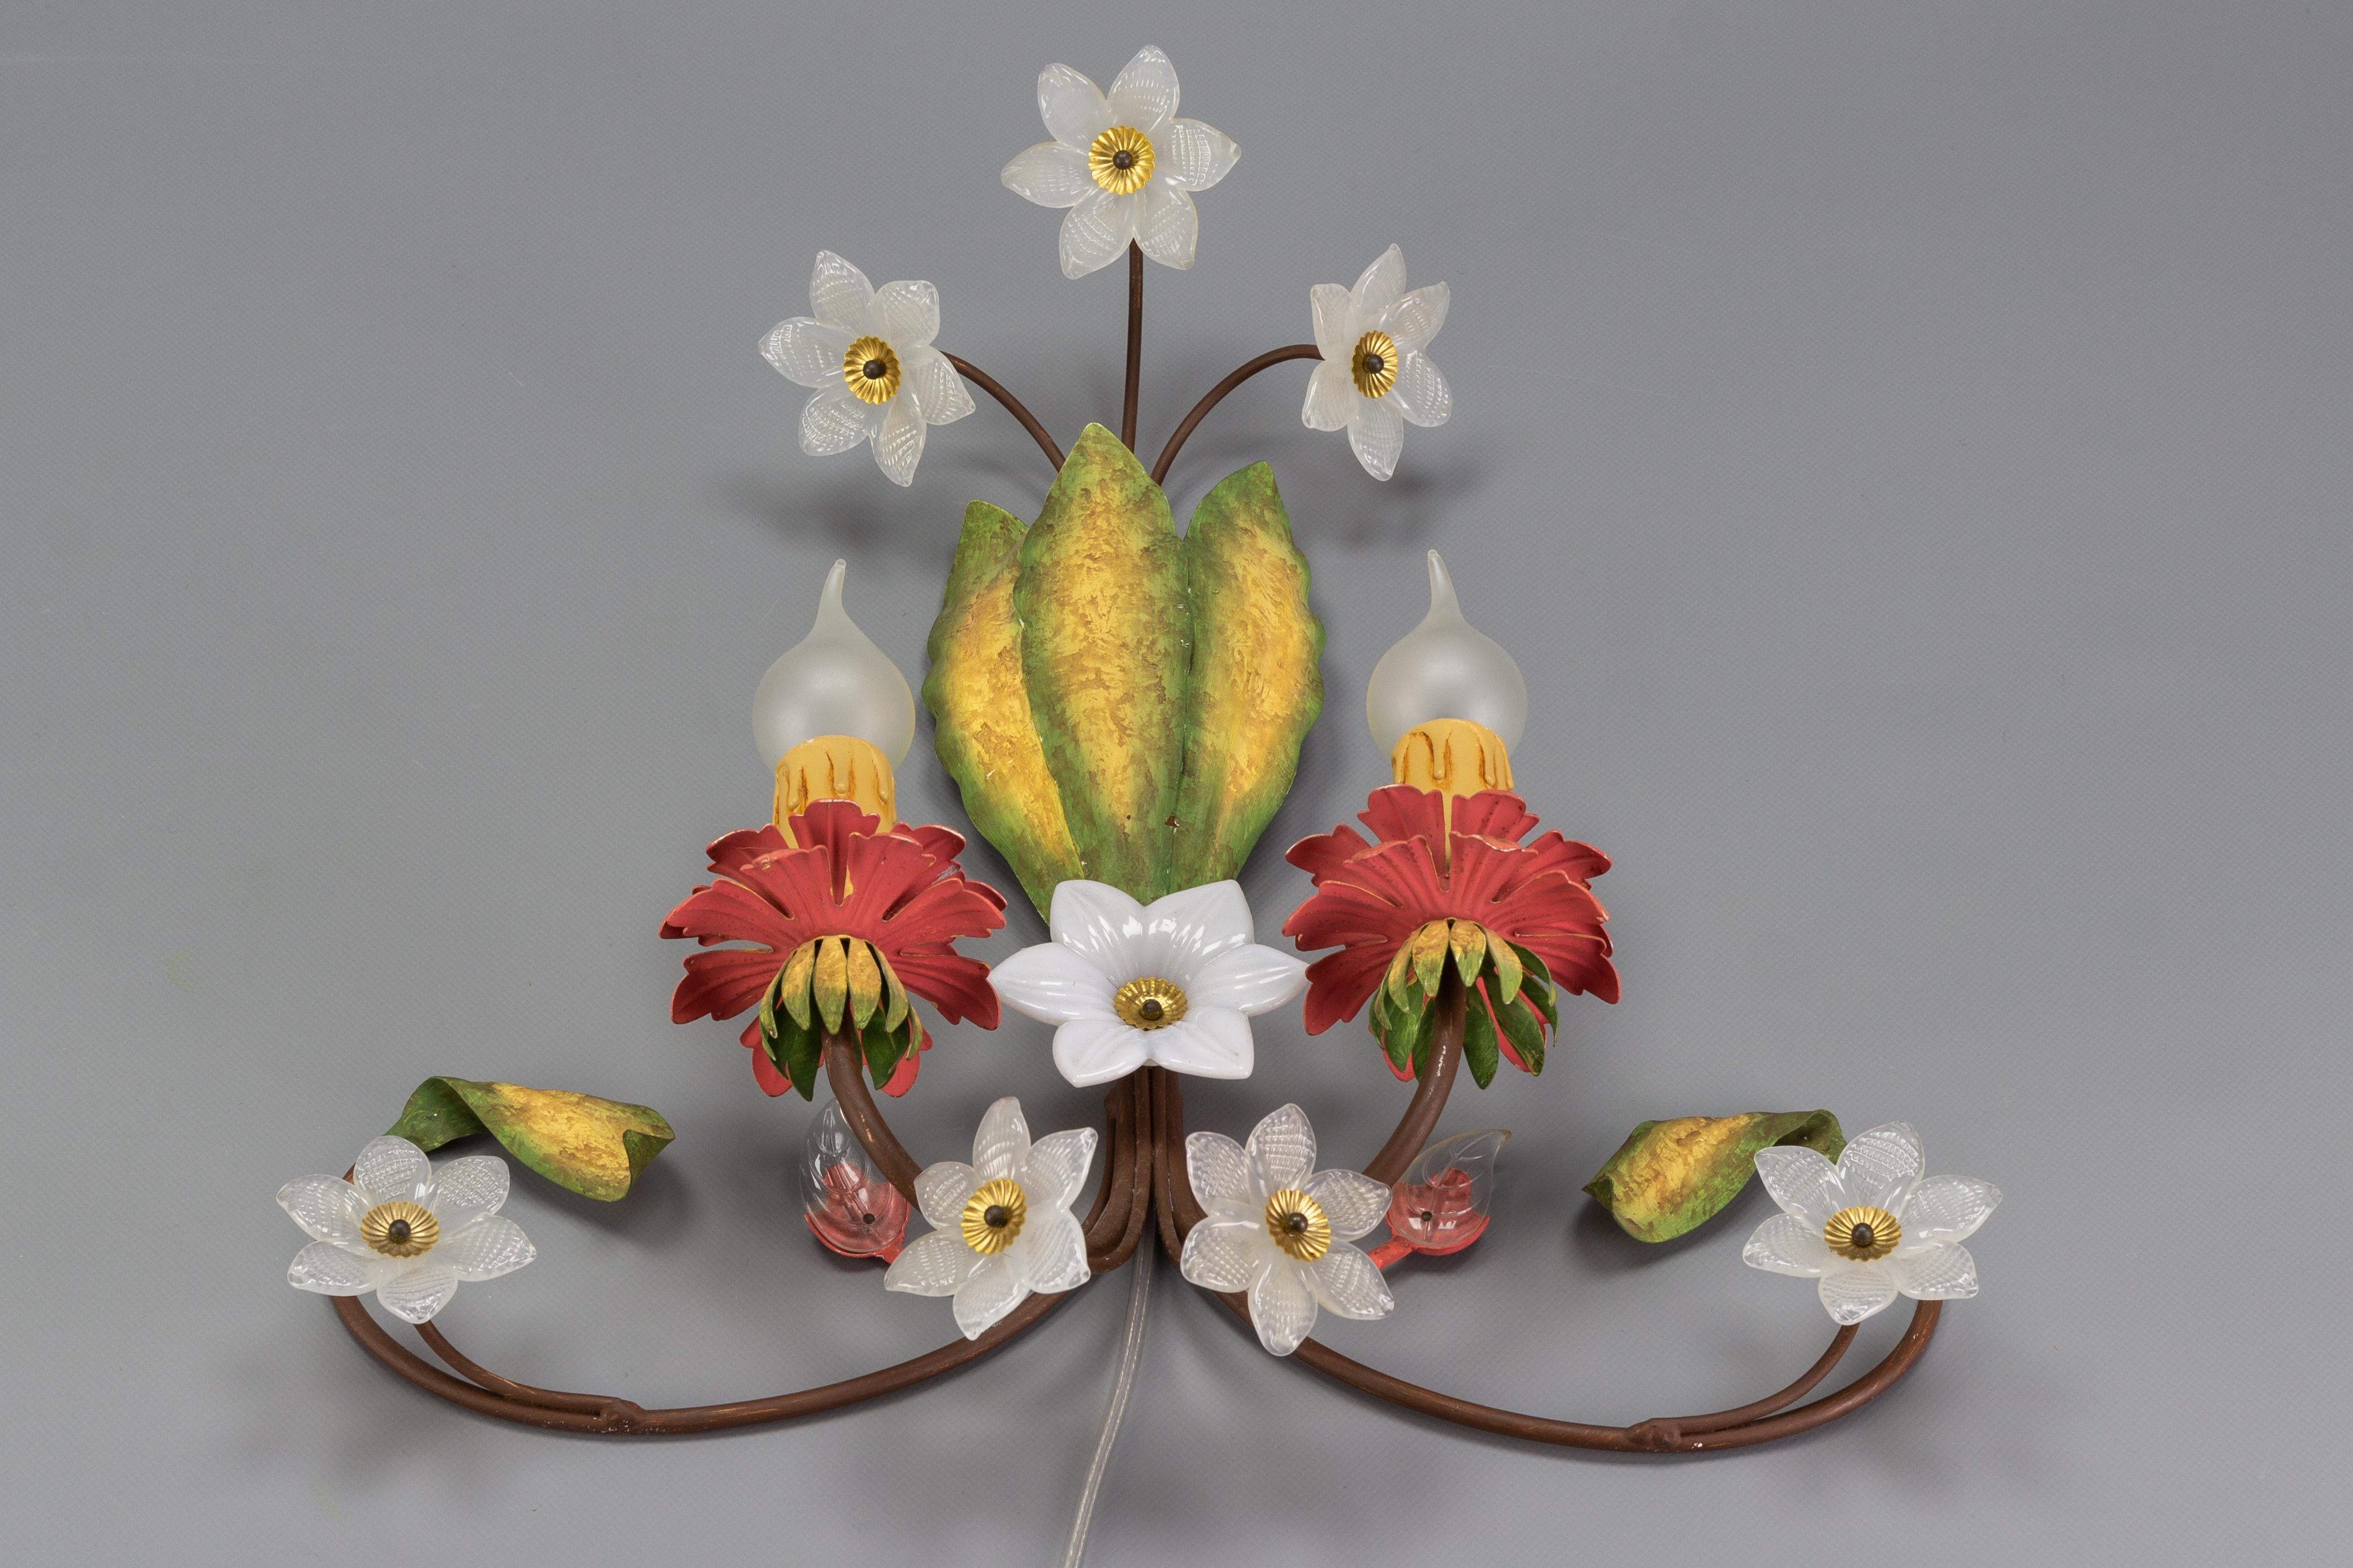 An absolutely adorable Italian Florentine sconce made of metal and glass in the 1970s. This stunning Hollywood Regency style wall sconce features three large metal leaves in green and yellow and is adorned with eight white glass flowers and two